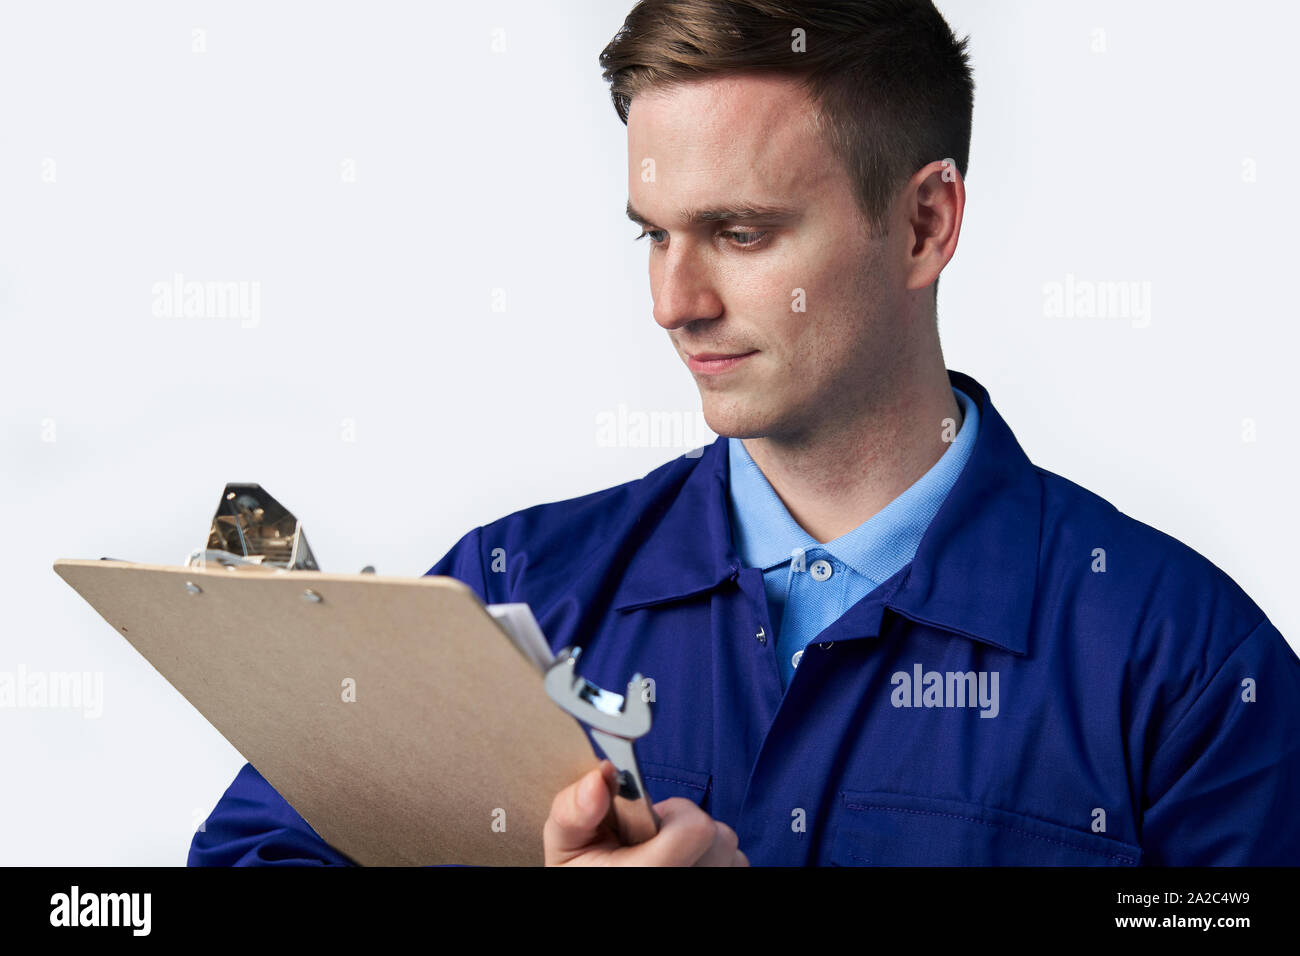 Male Engineer With Clipboard And Spanner Against White Background Stock Photo